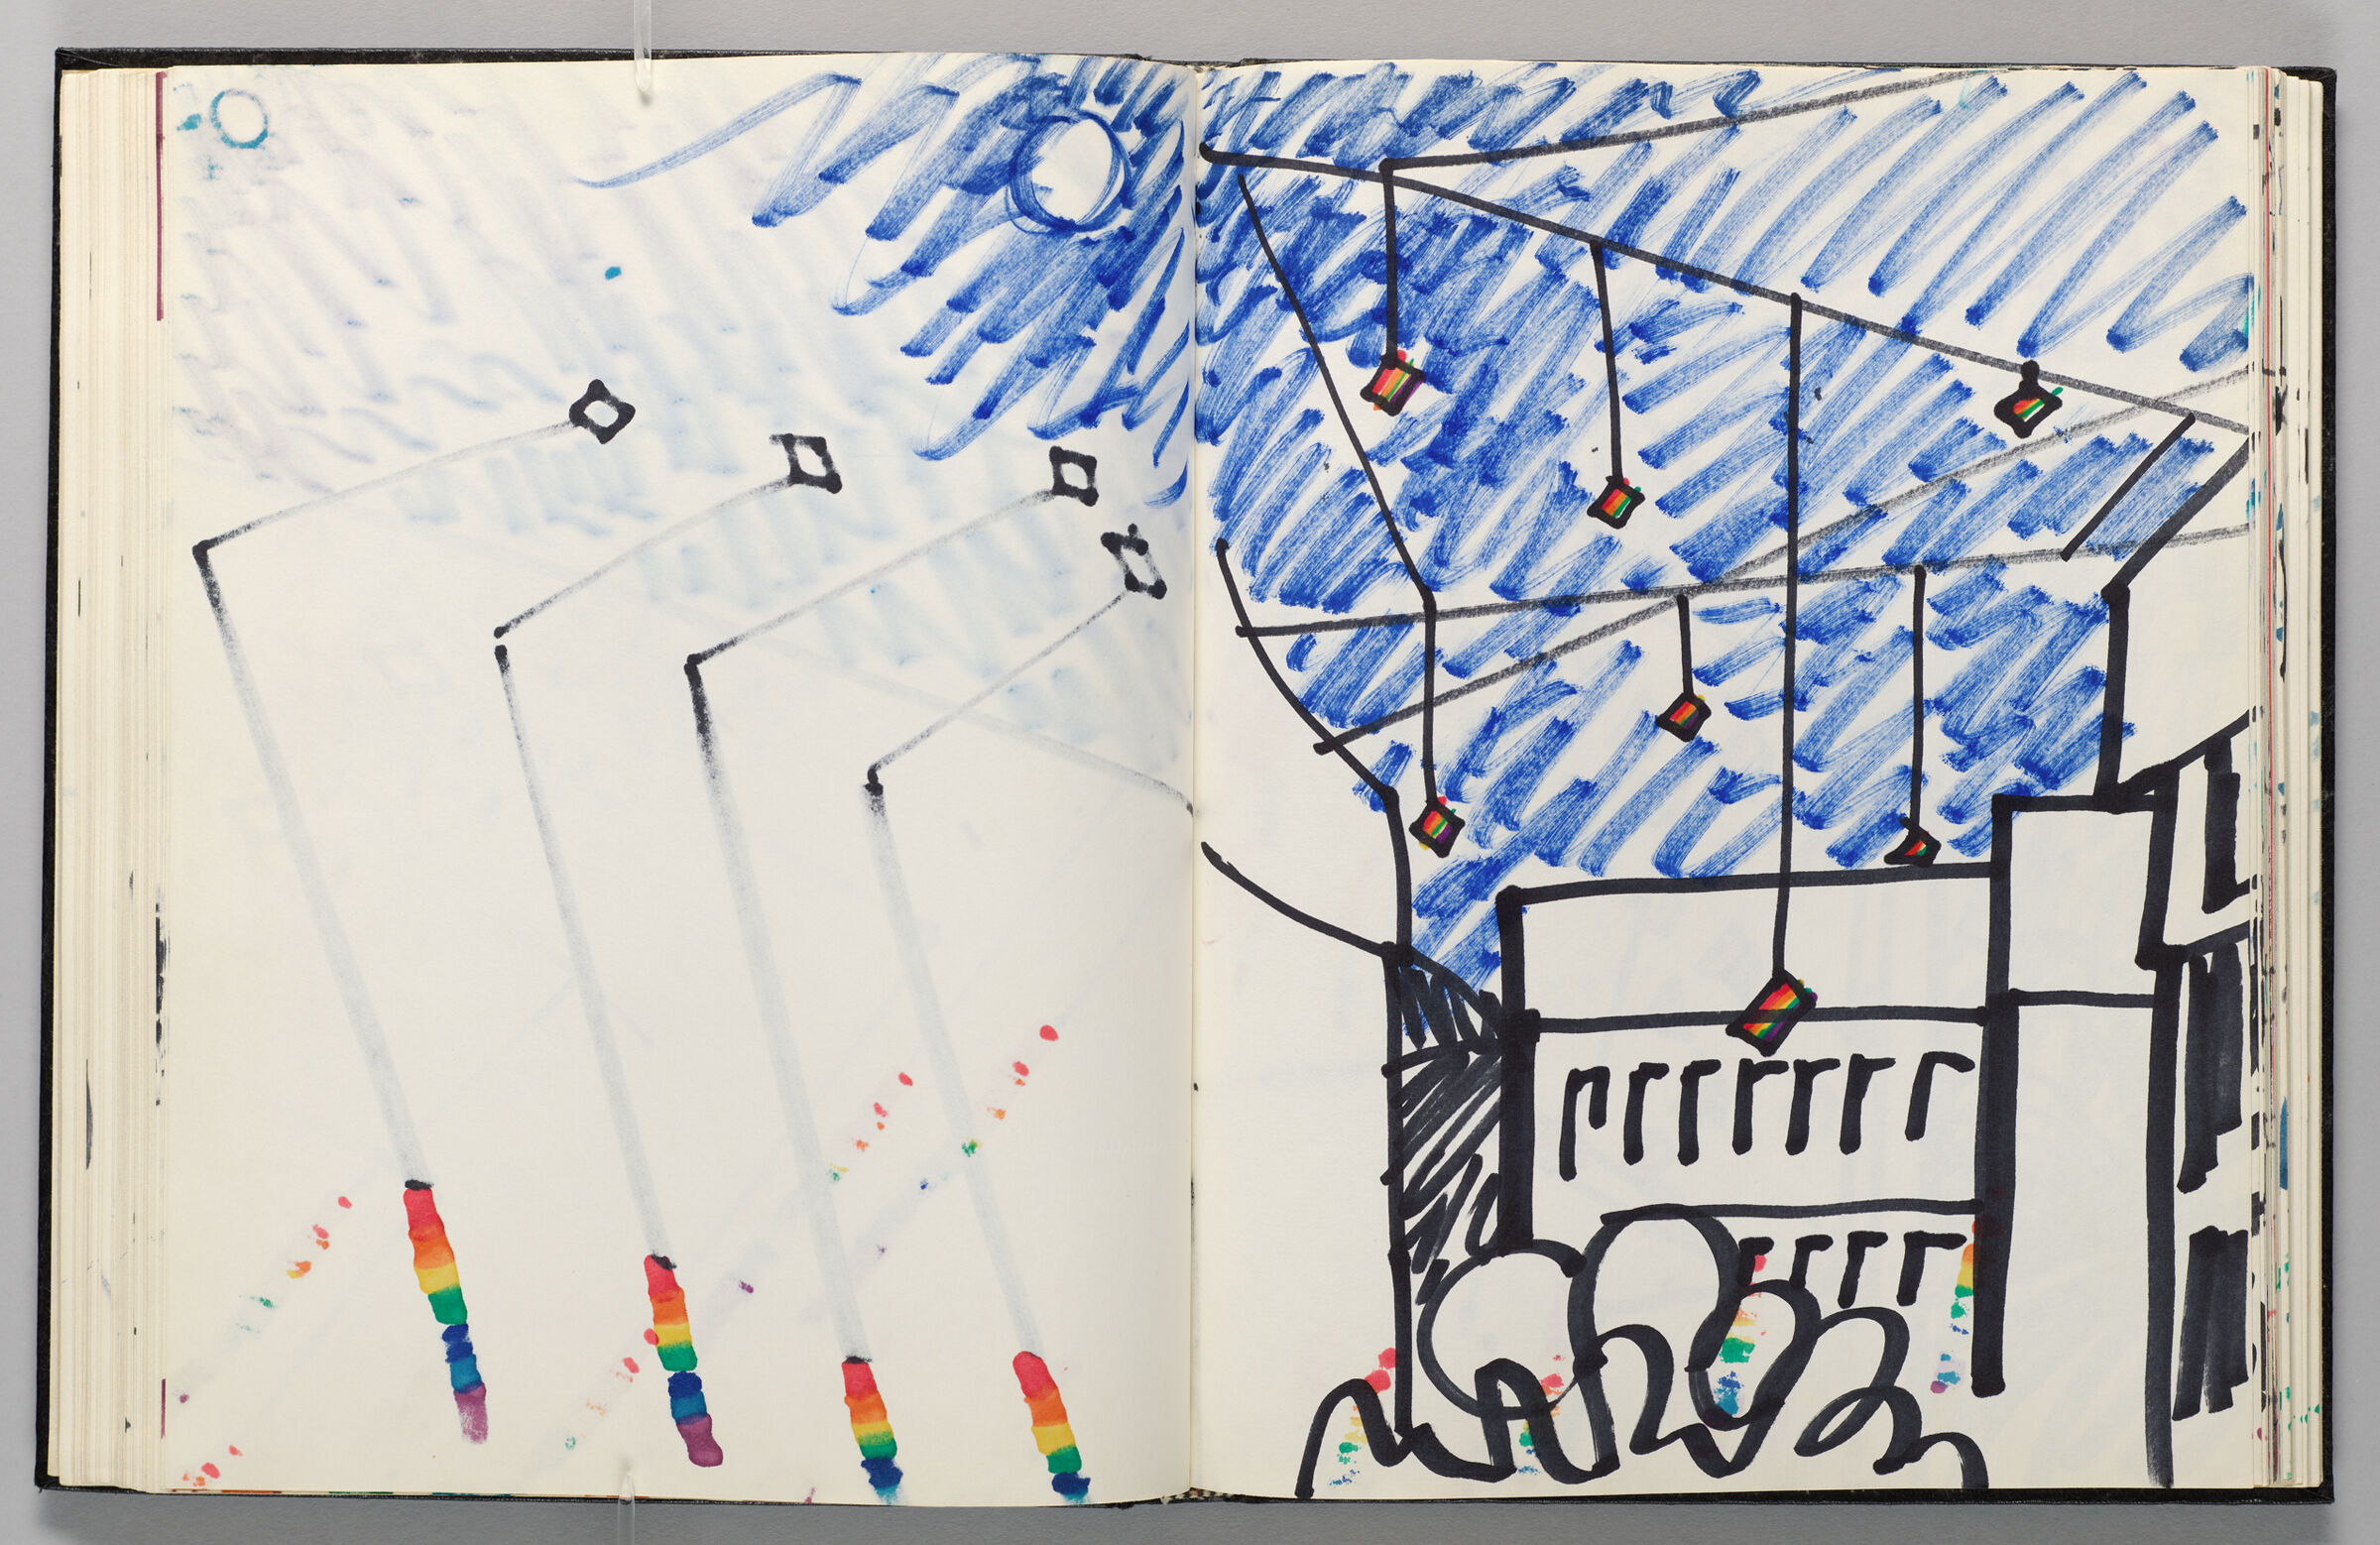 Untitled (Design For Hanging Prisms In Courtyard Atop Bleed-Through From Previous Pages, Two-Page Spread)